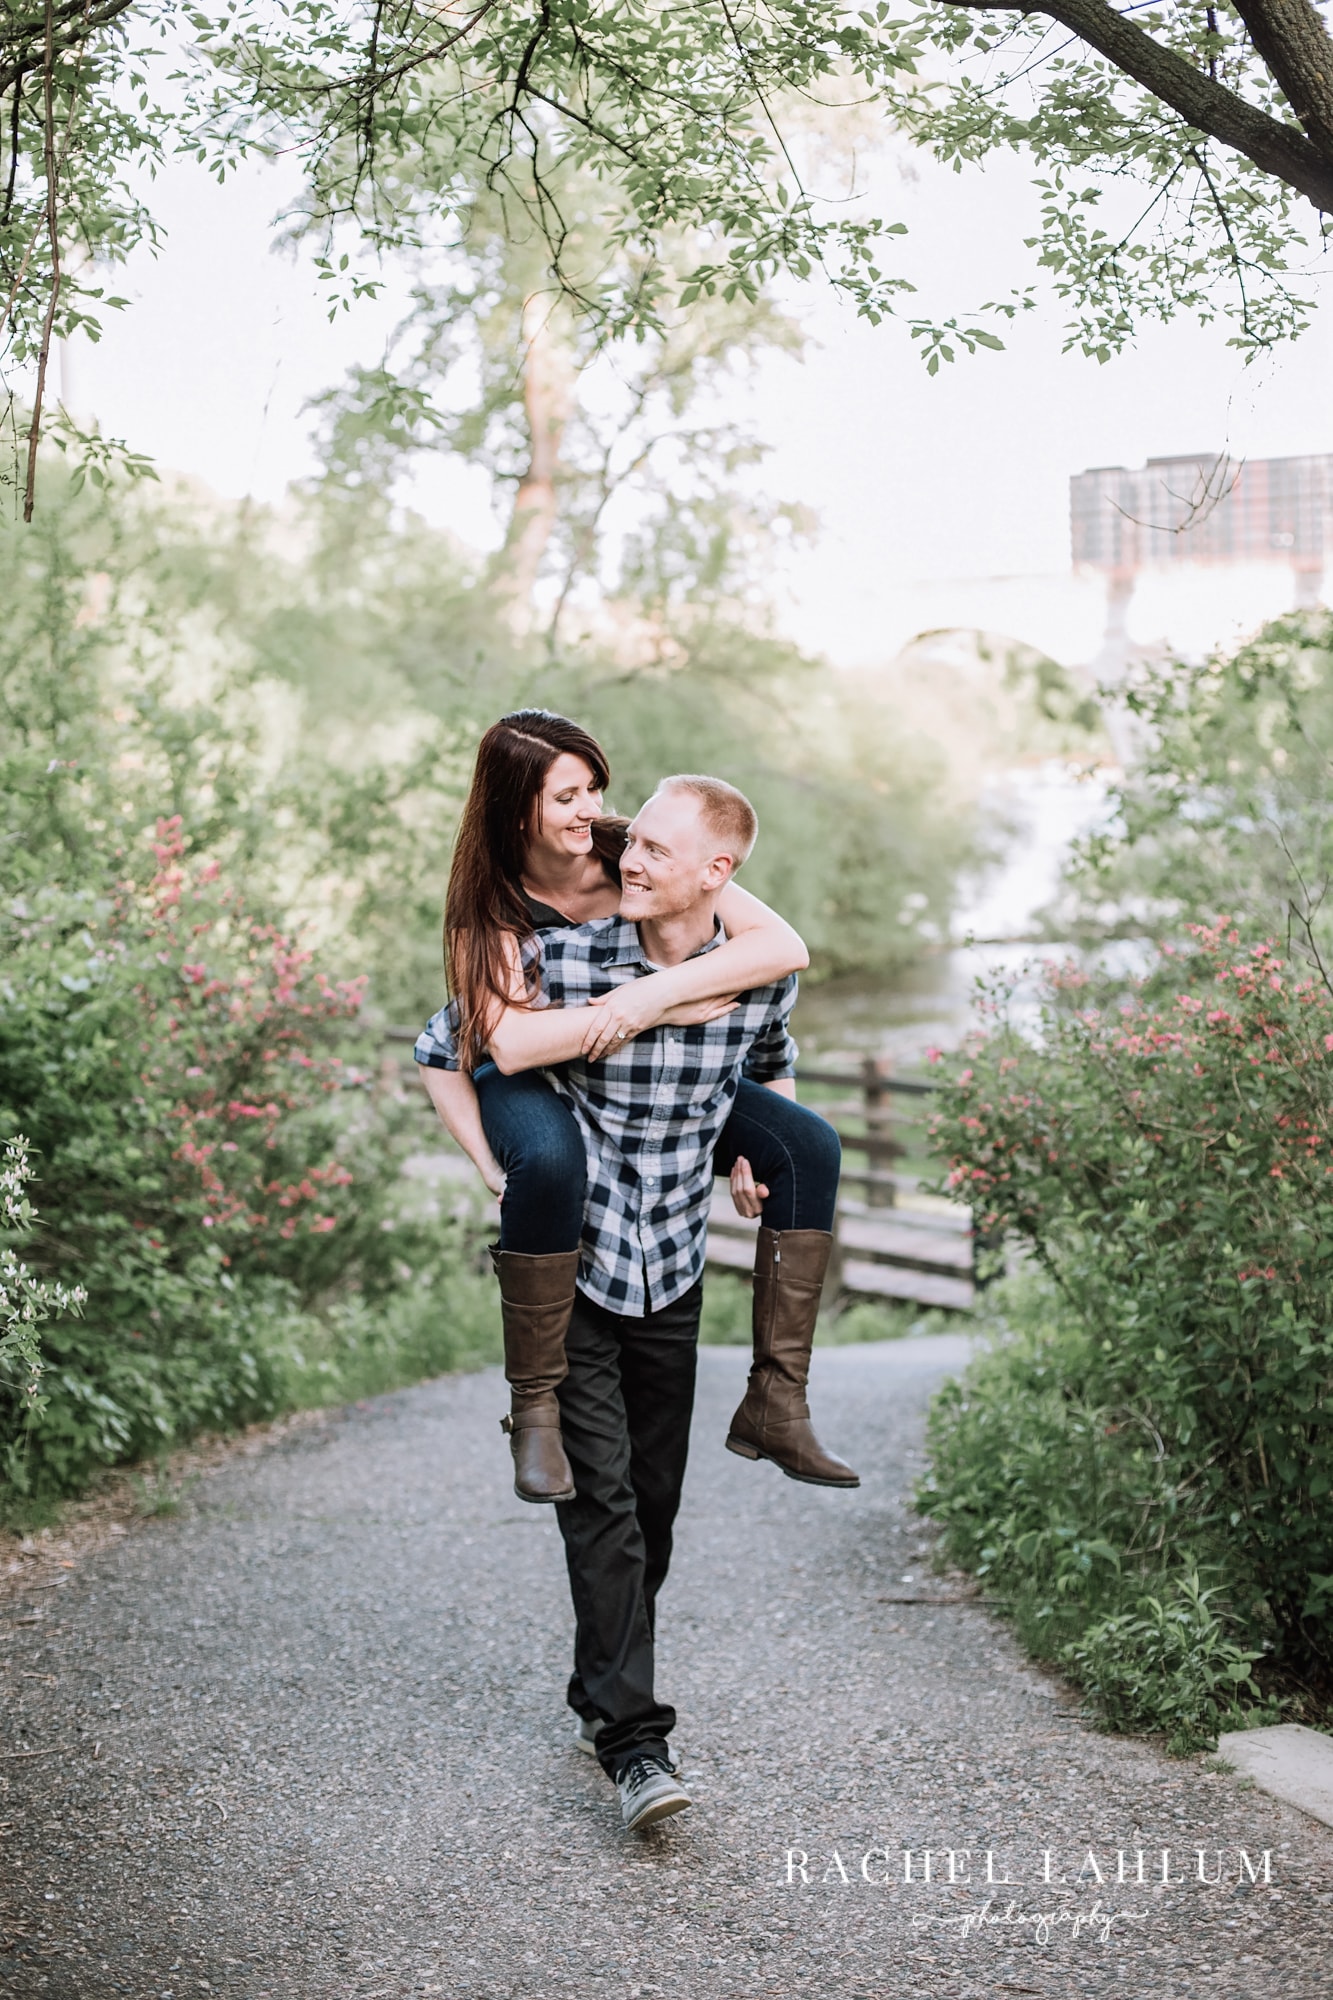 Couples Photography - Capturing Love Stories | Click Love Grow